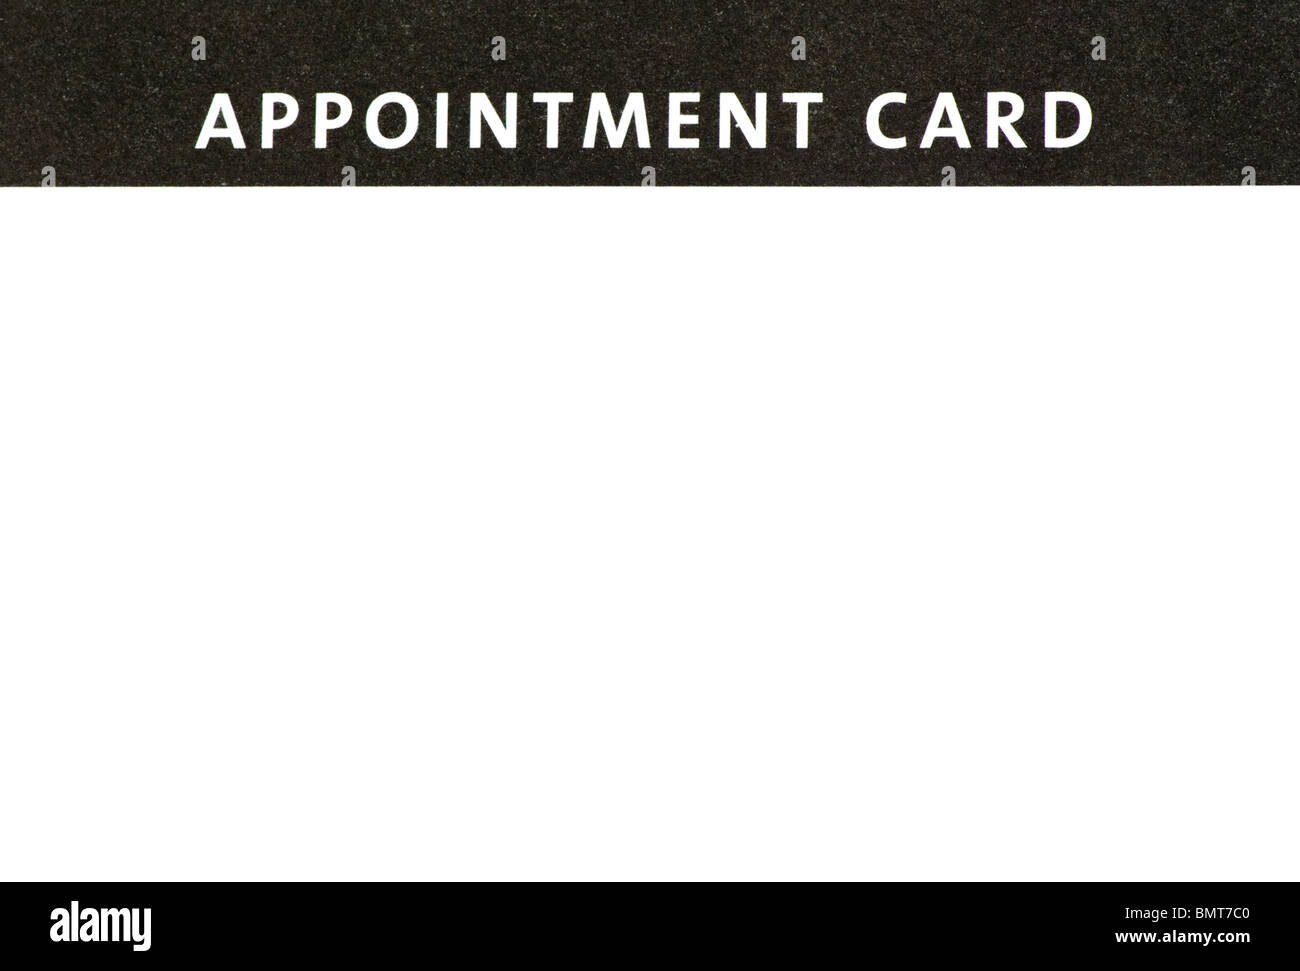 A Blank Appointment Card Stock Photo